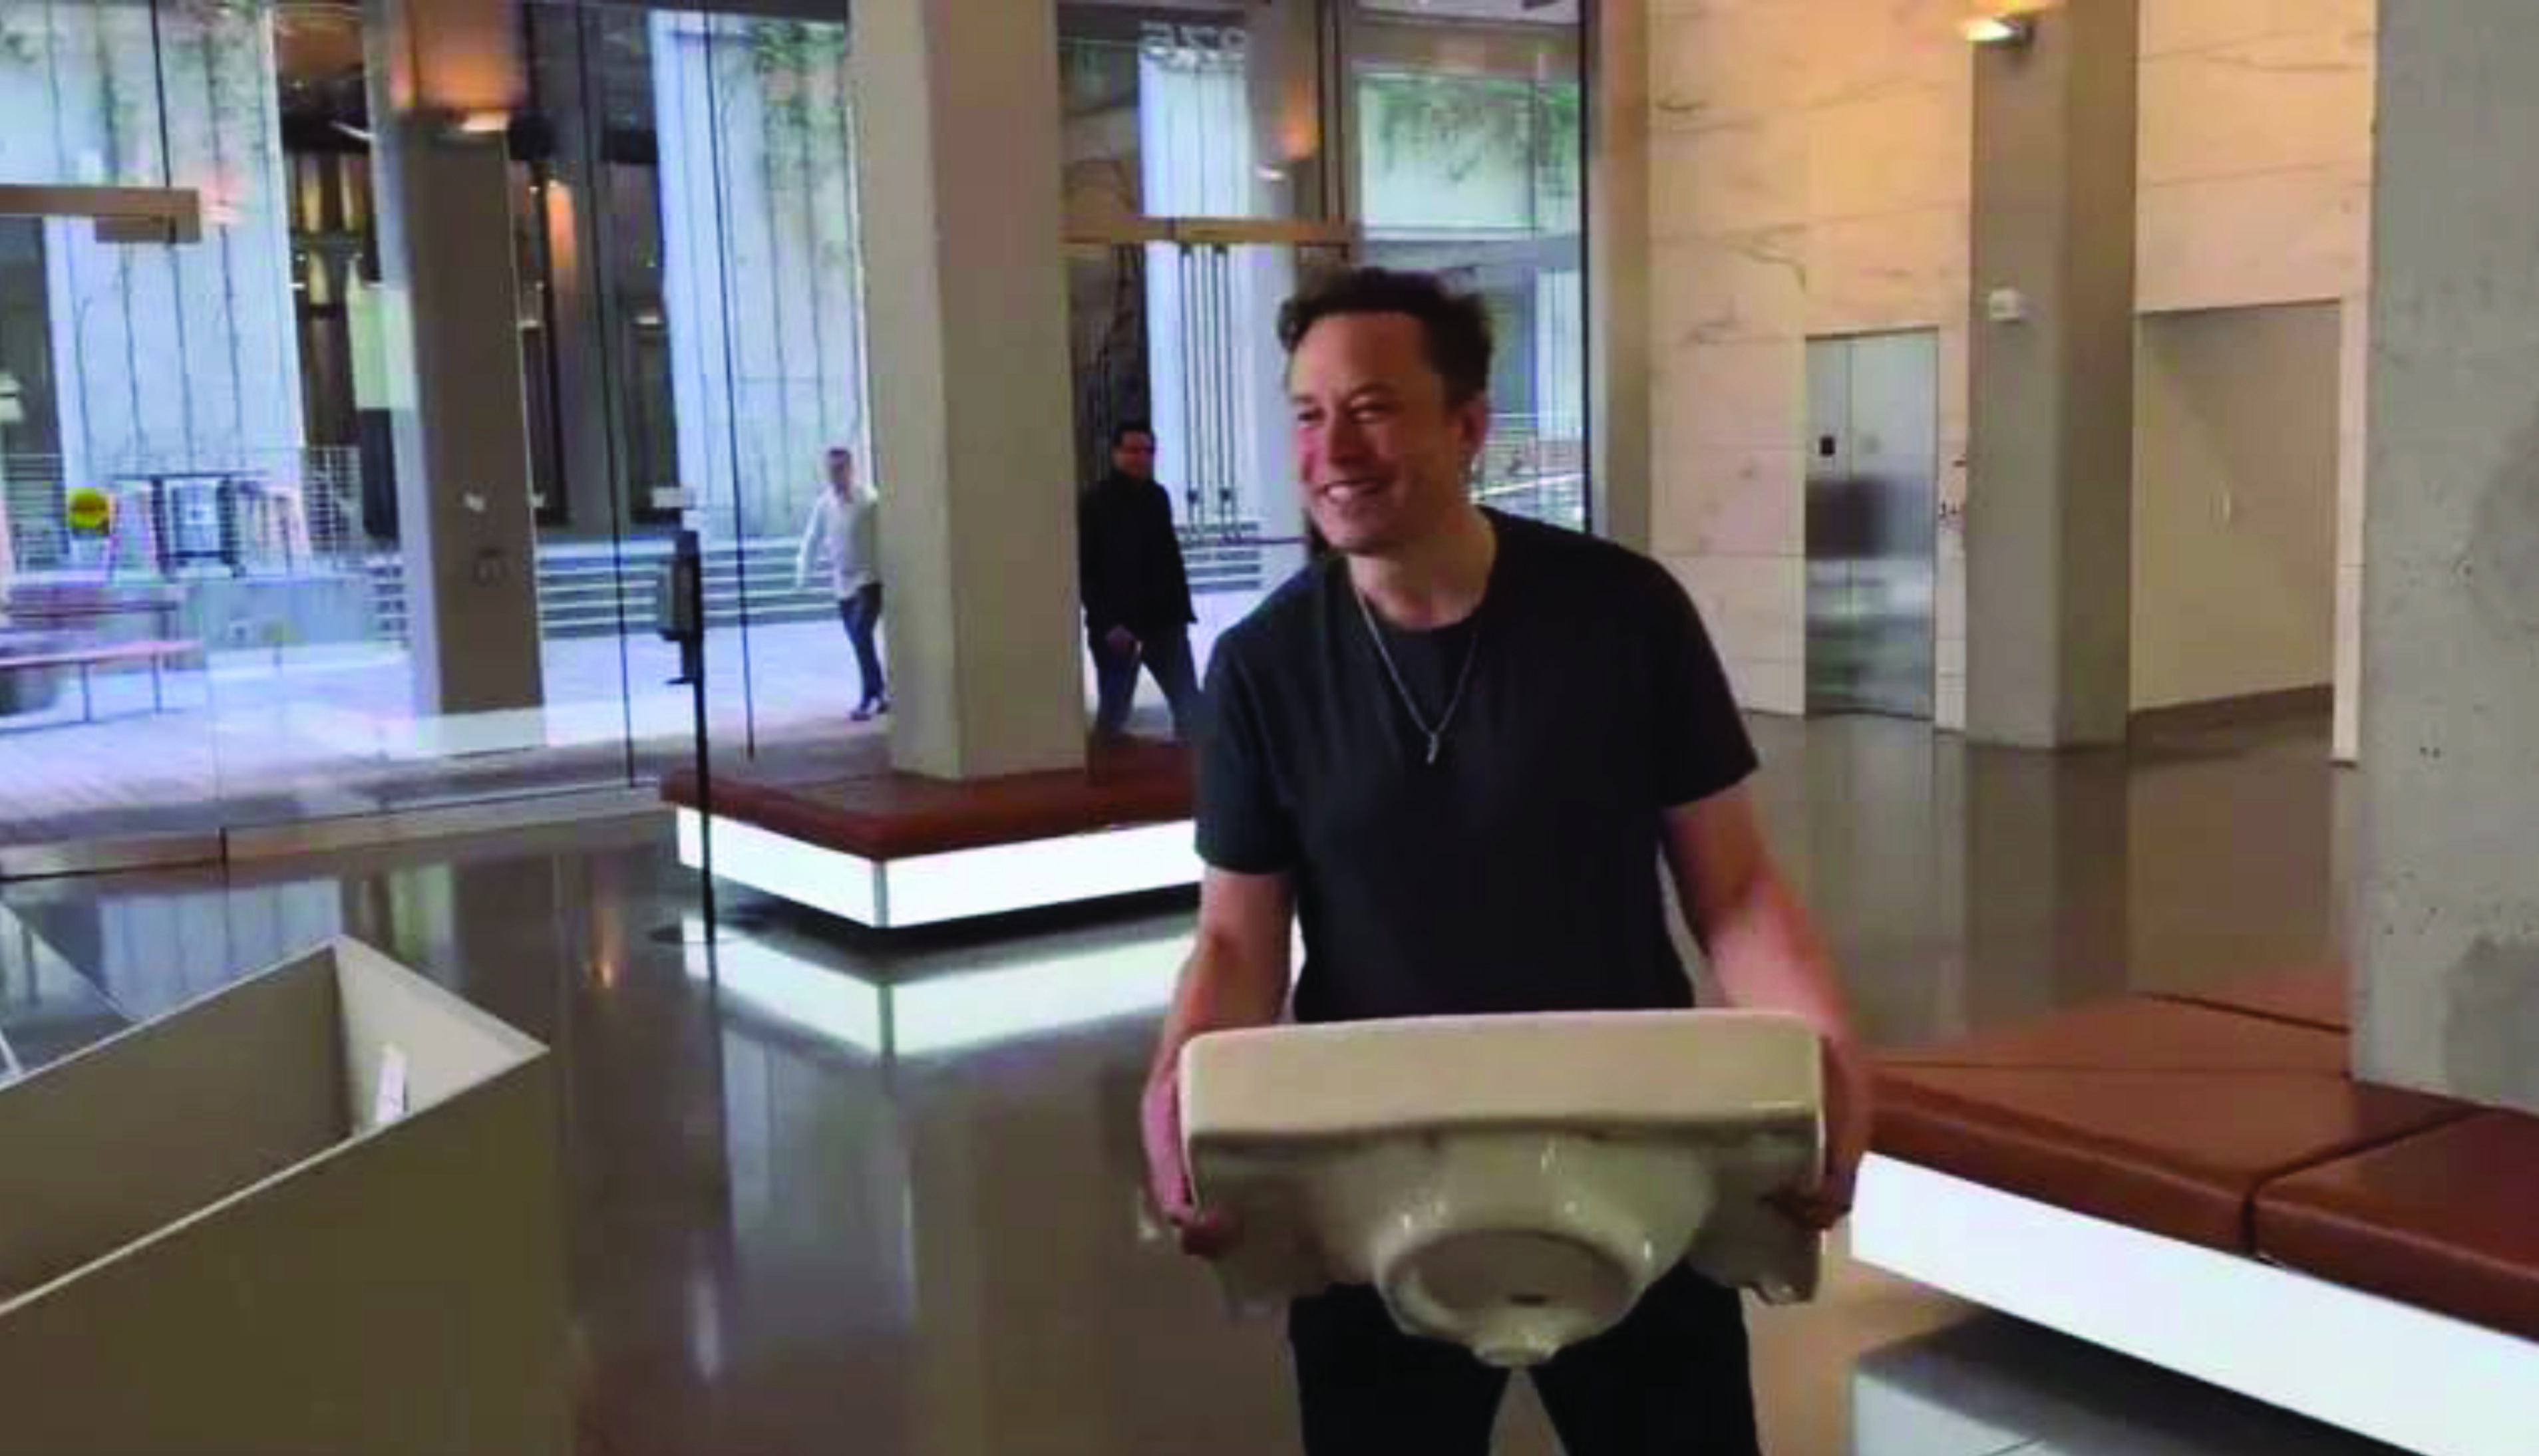 Musk turning up at Twitter’s headquarters carrying a sink, announcing “let that sink in”.